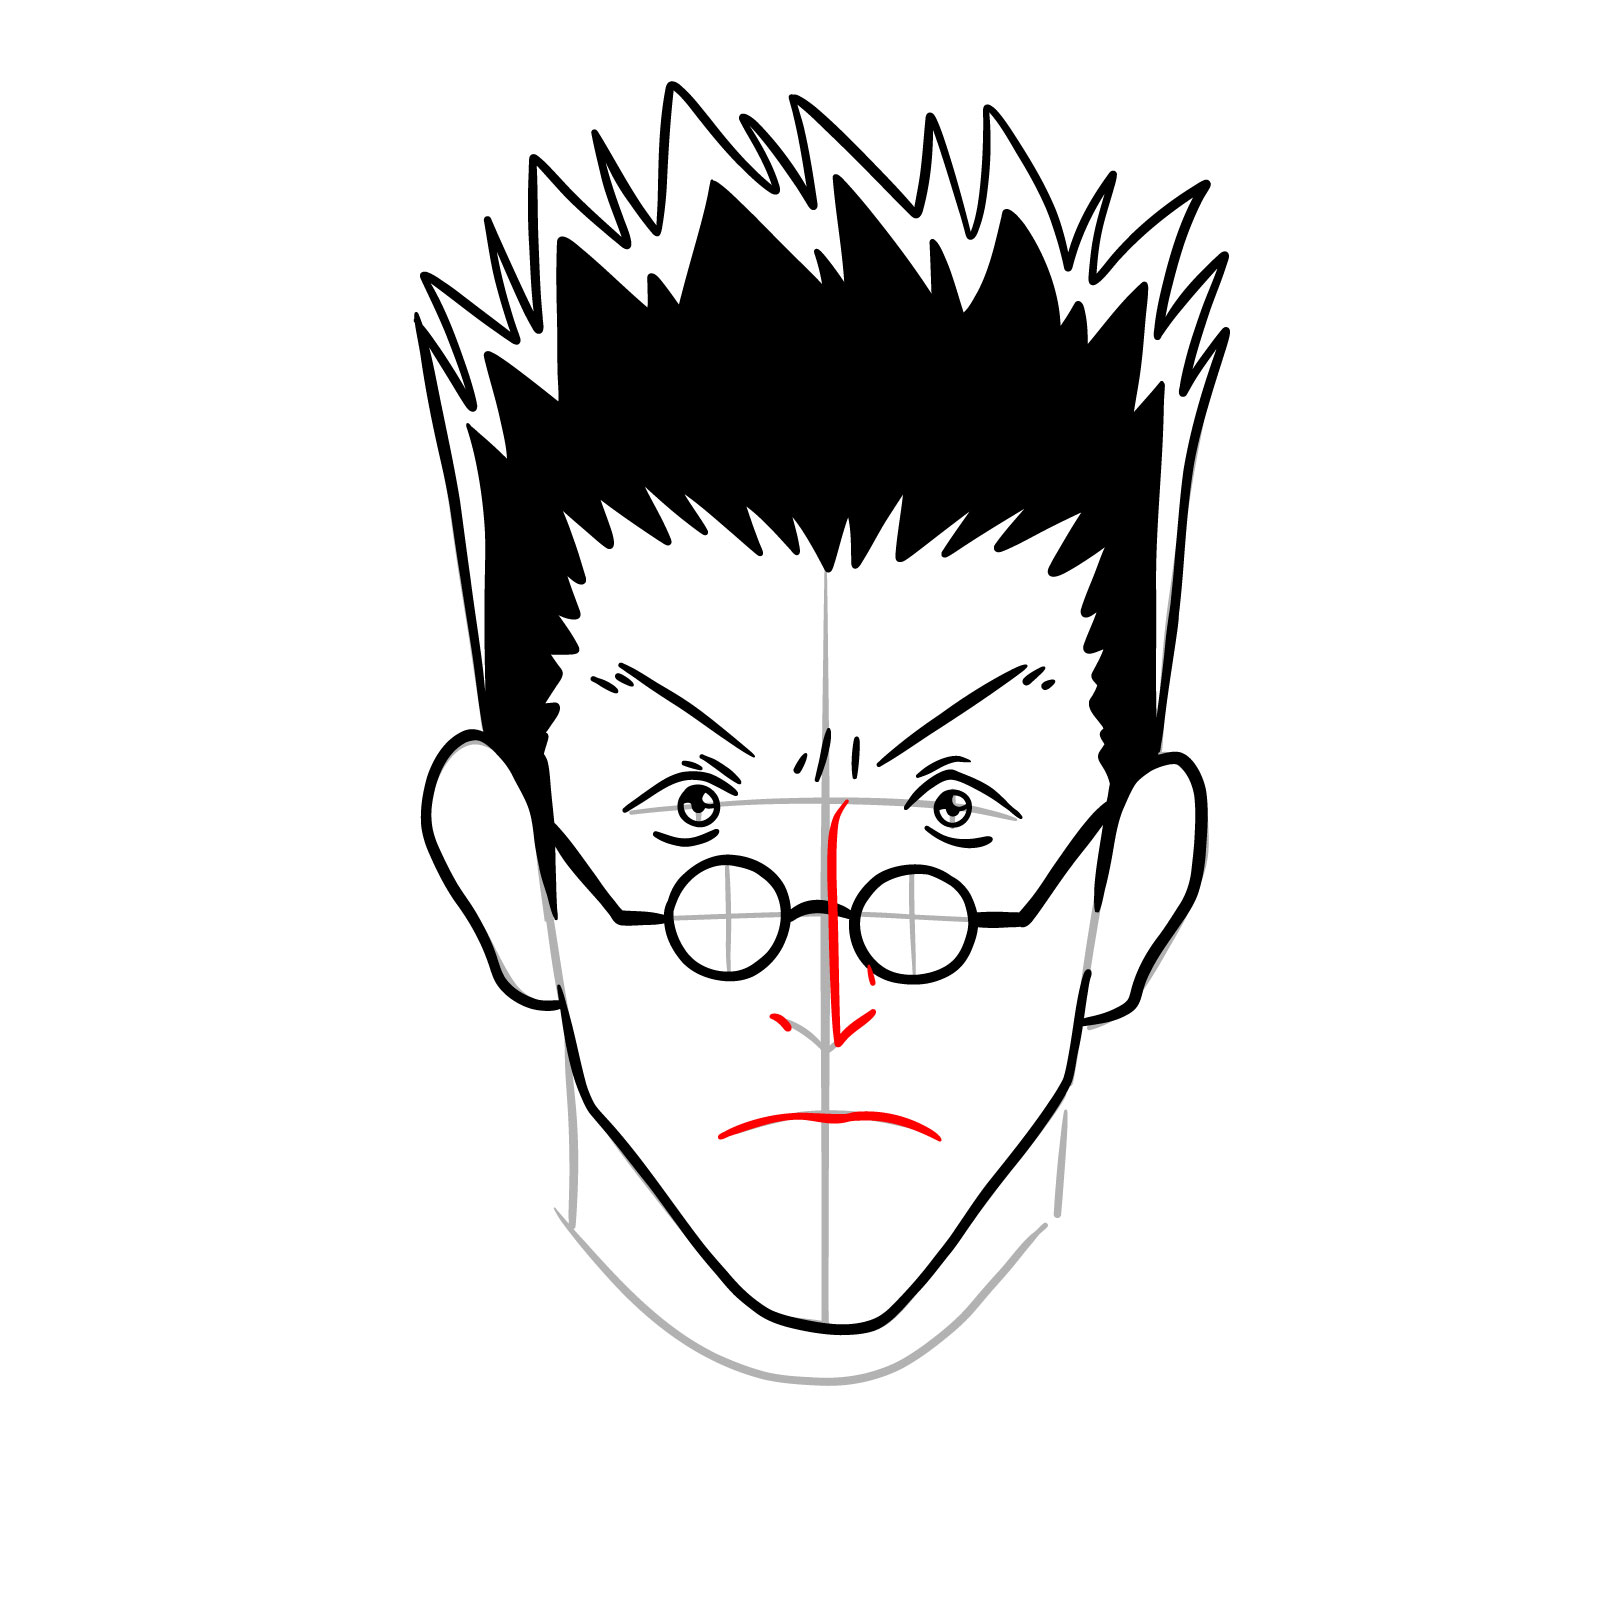 How to draw Leorio's face - Hunter x Hunter - step 14